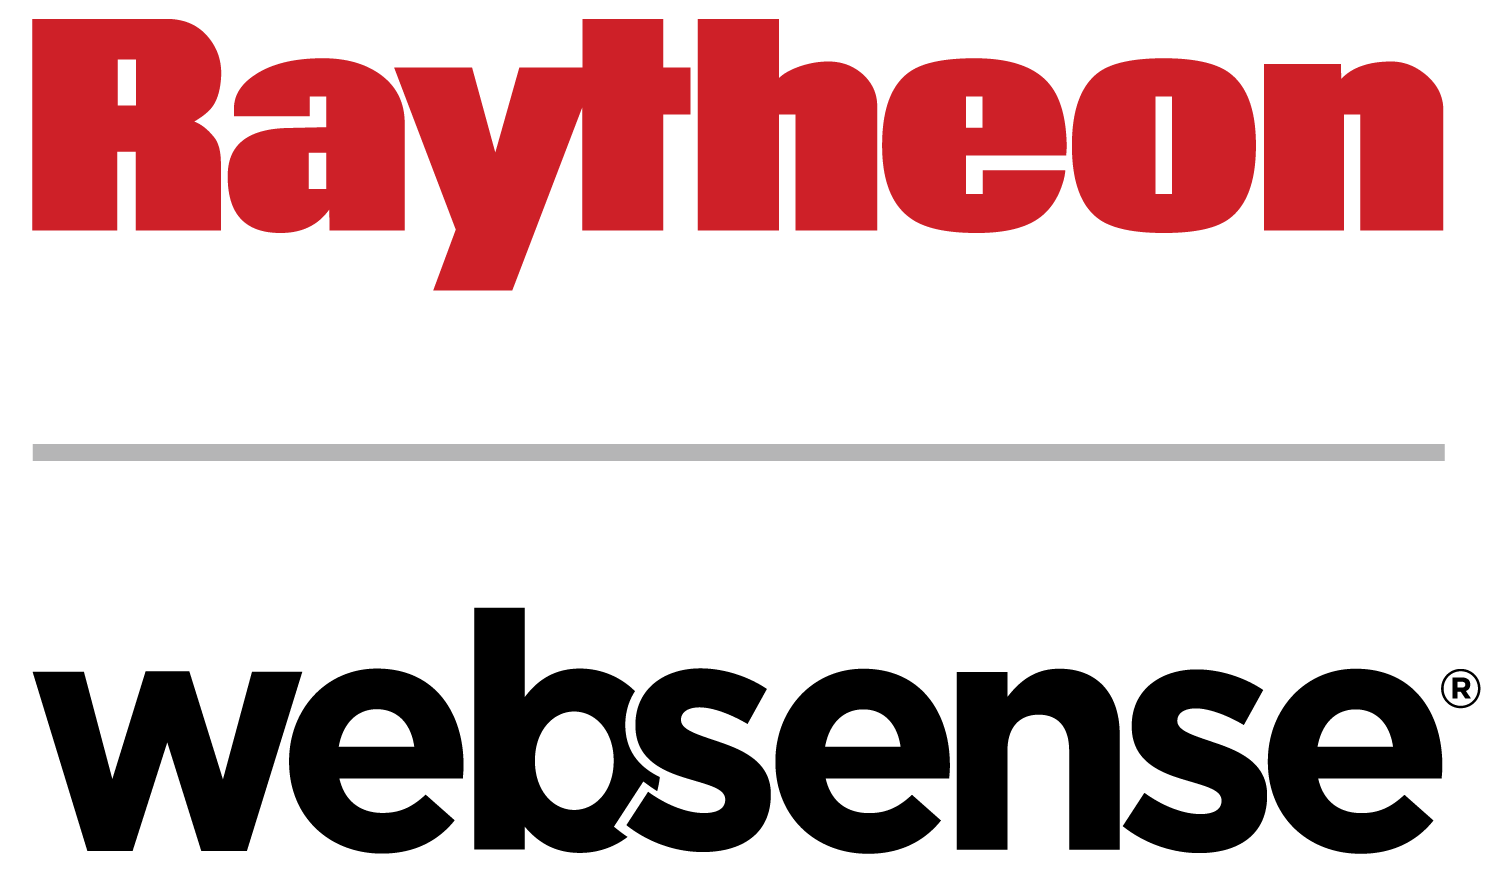 Raytheon Logo - Raytheon Merges with Websense, Rebrands To Forcepoint